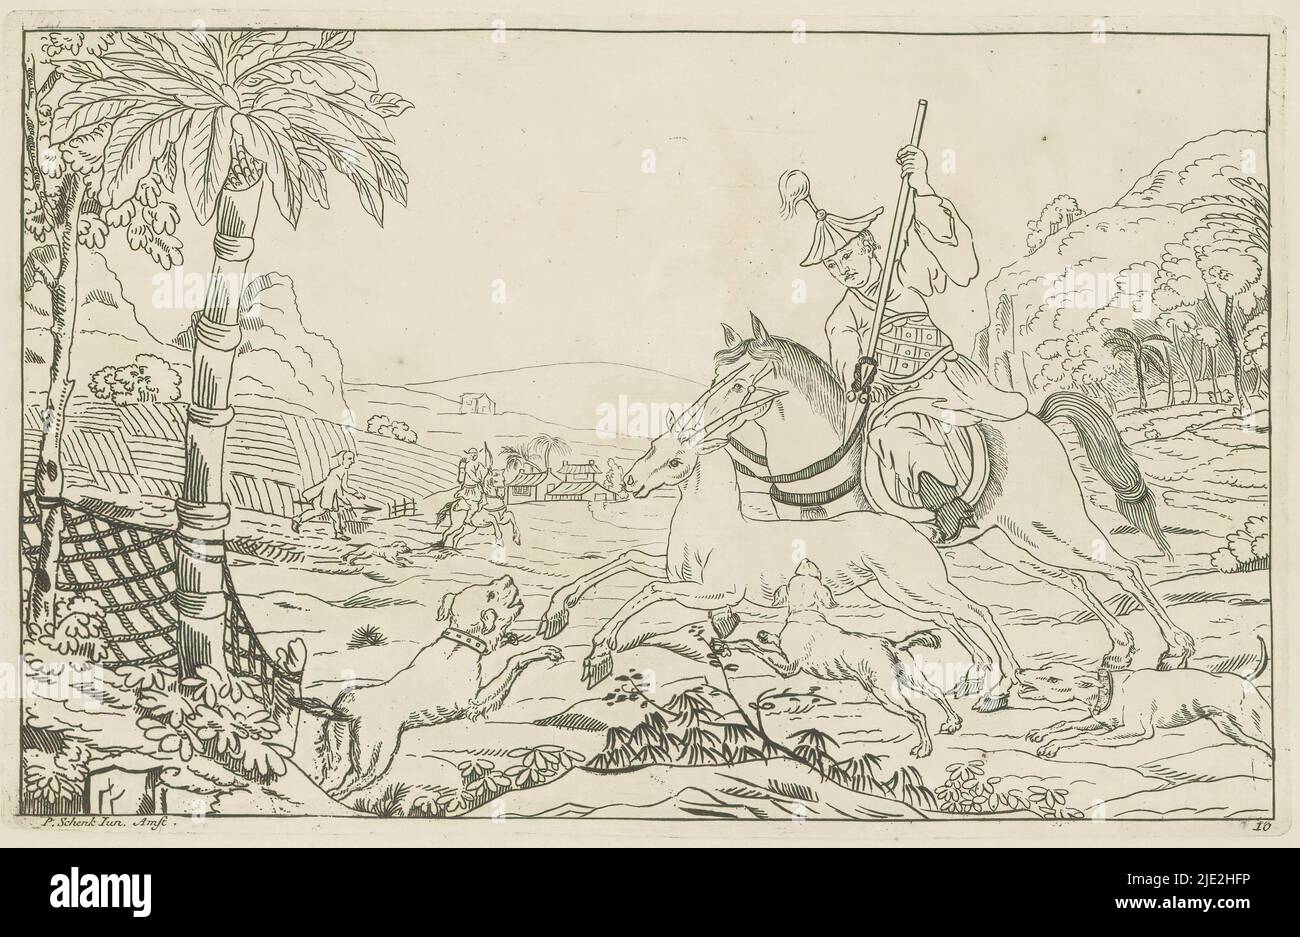 Hunting an ungulate, Chinese hunting scenes (series title), Nieuwe geinventeerde Sineesen, met groote moeyte geteekent en in 't Ligt gegeven, door P: Schenk Jun (...), third part (series title), Chinese landscape with a hunter with spear and hounds hunting an ungulate, perhaps a deer. Print is part of an album., print maker: Pieter Schenk (II), after design by: Pieter Schenk (II), publisher: Pieter Schenk (II), (mentioned on object), Amsterdam, 1727 - 1775, paper, etching, height 163 mm × width 255 mm Stock Photo